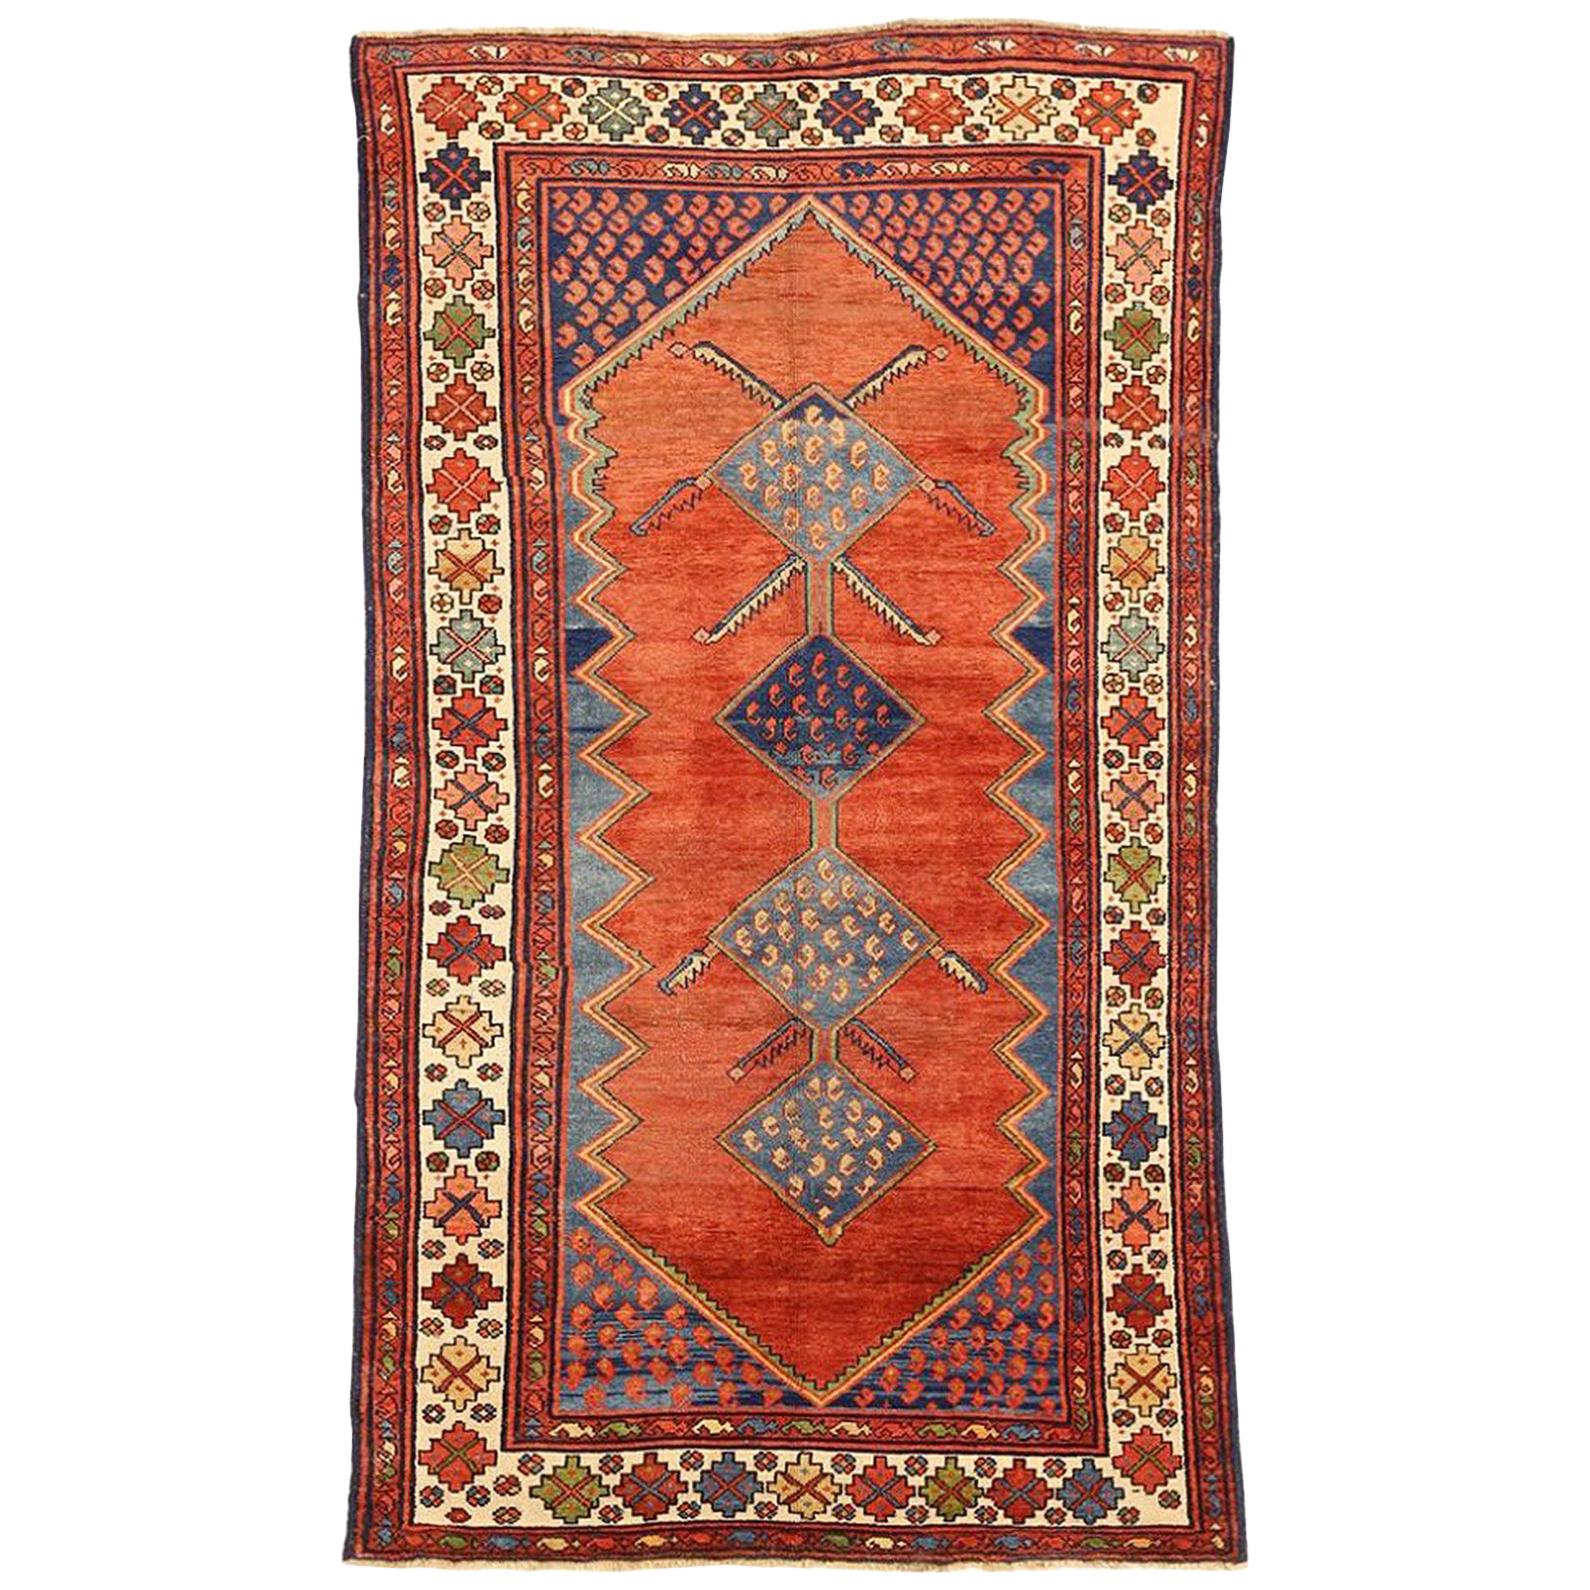 Antique Persian Hamadan Rug with Blue and Red Floral Details on Ivory Field